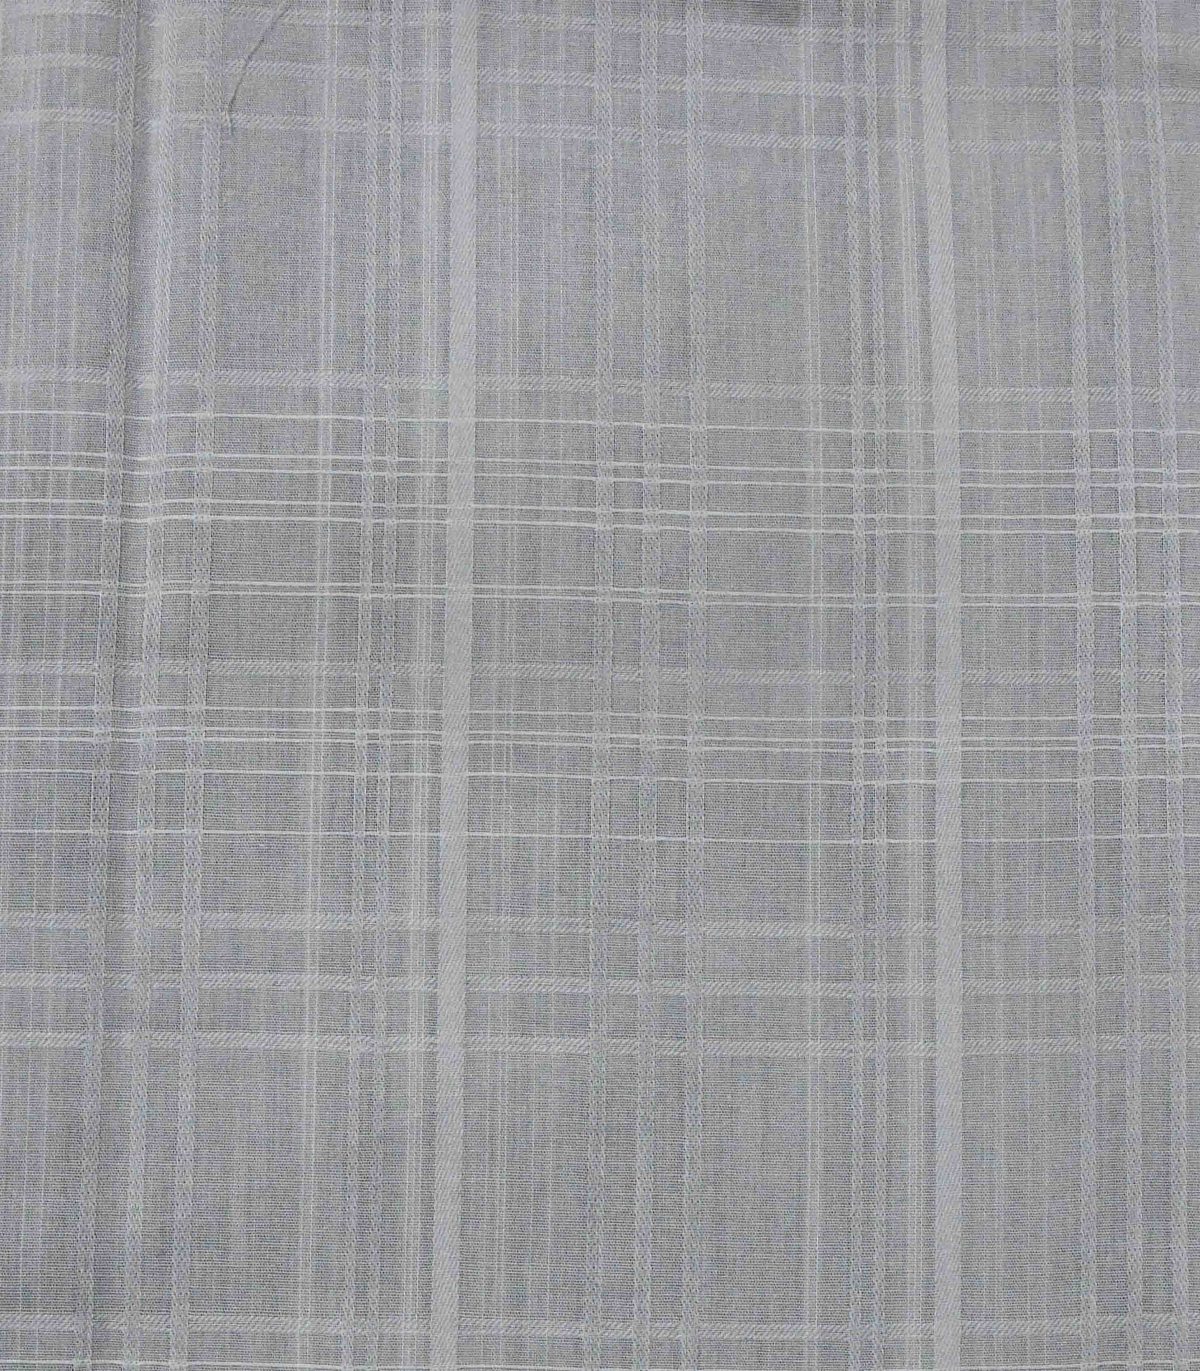 Cotton Dobby RFD Woven Fabric